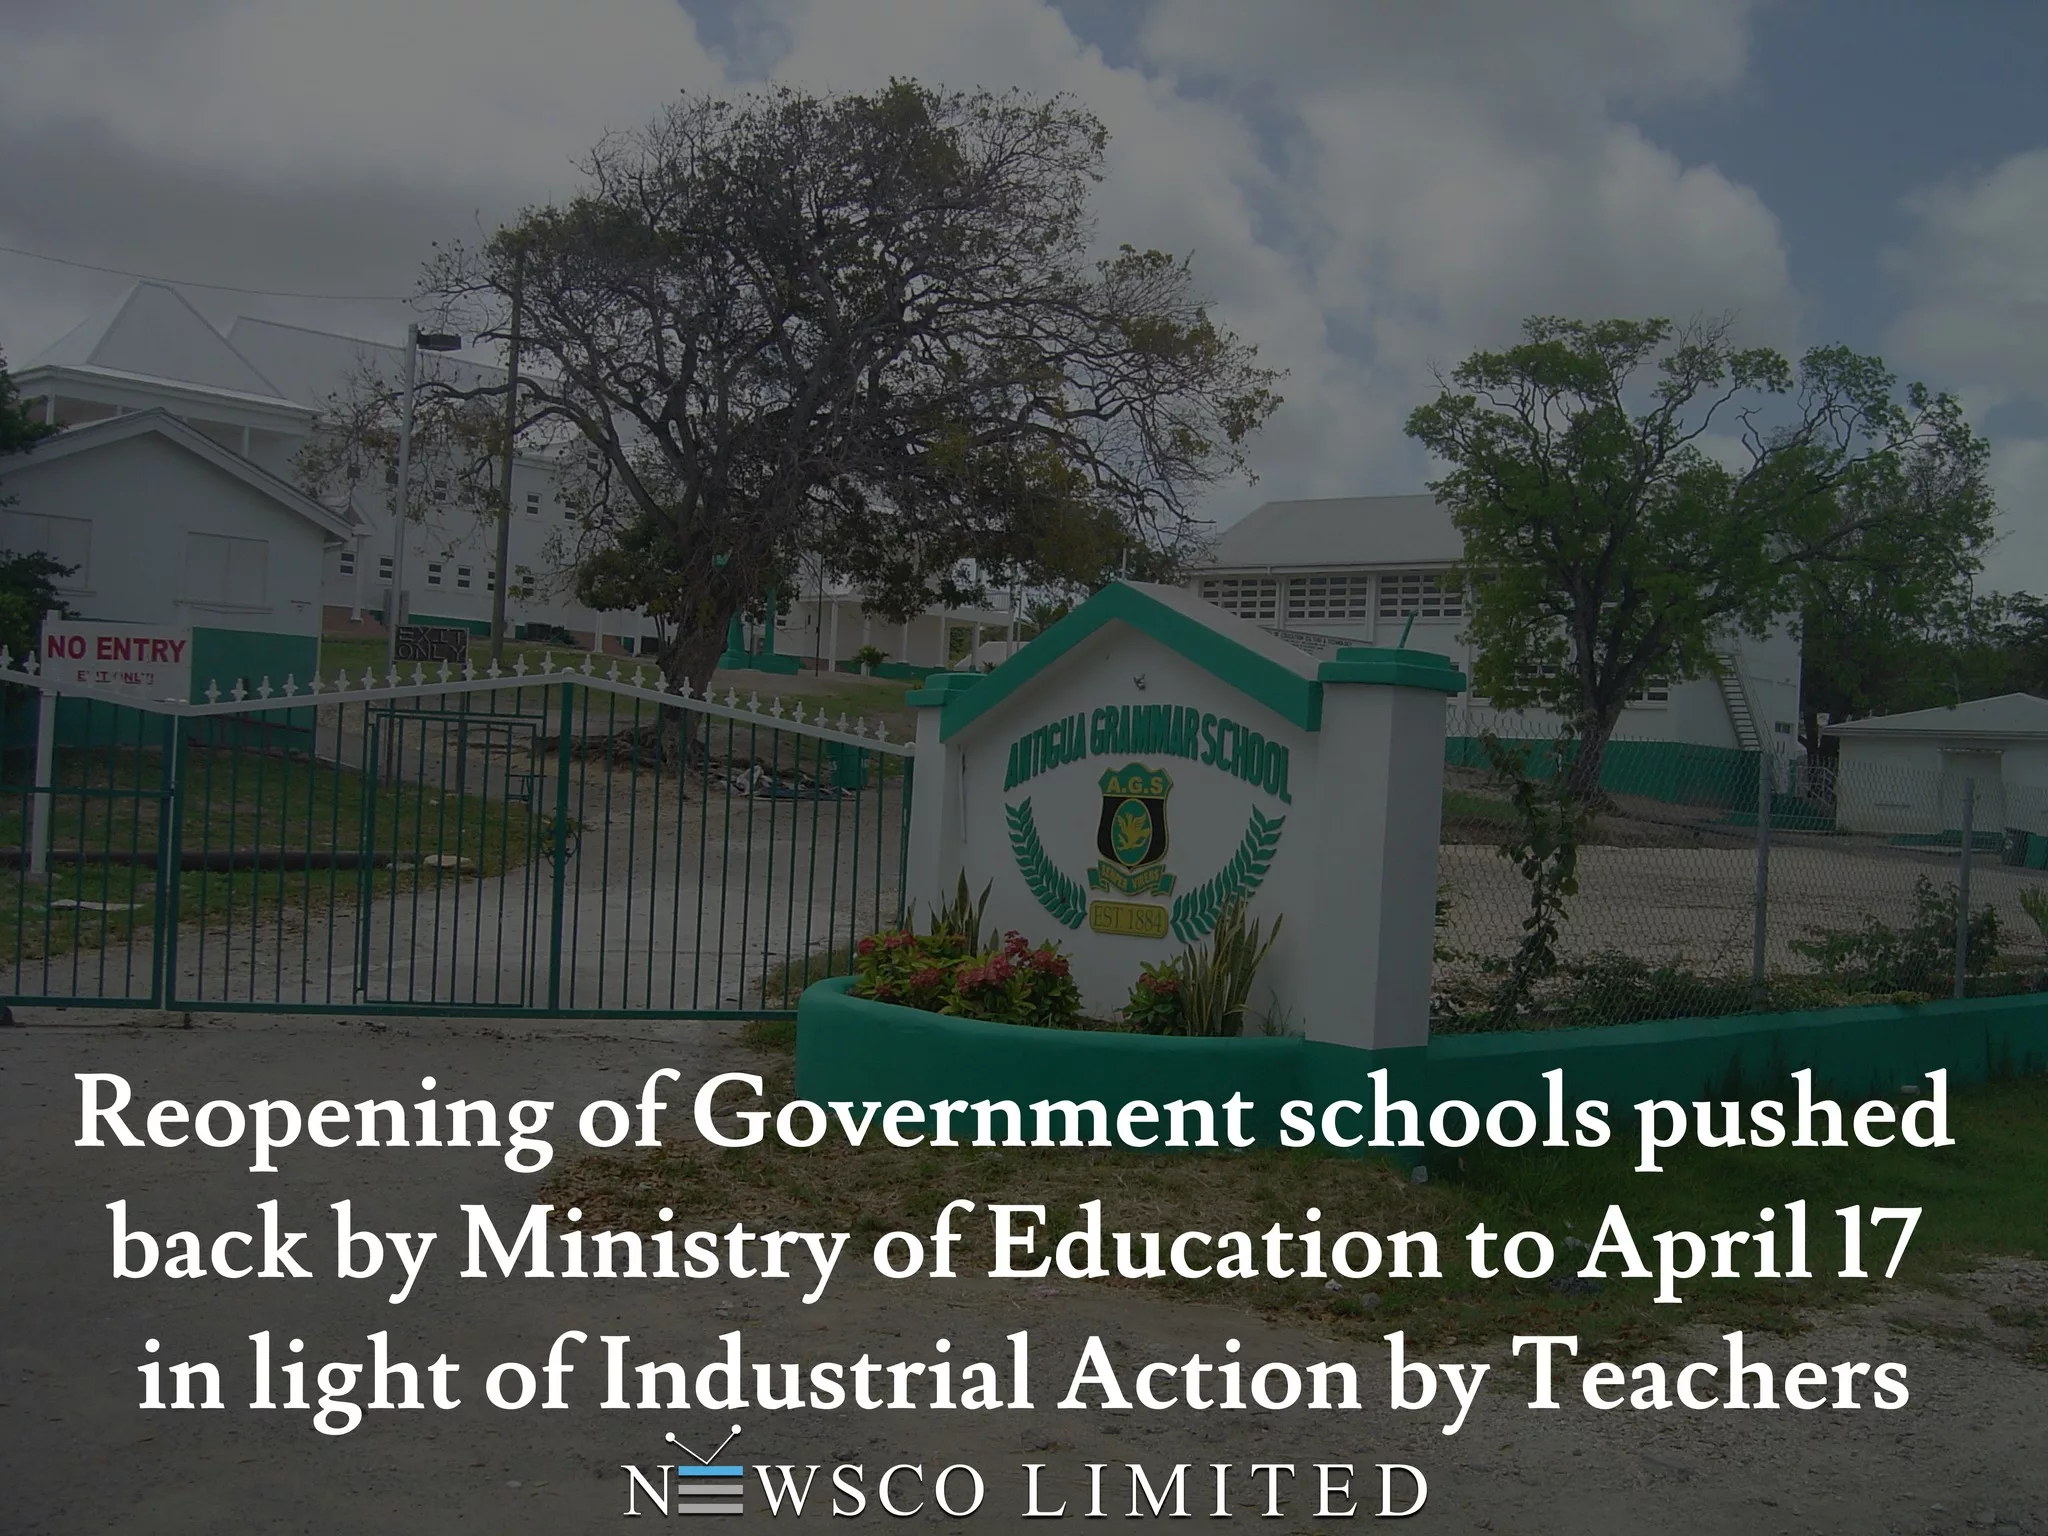 ministry-of-education-extends-schools-easter-vacation-due-to-planned-industrial-action-by-teachers-antigua-observer-newspaper